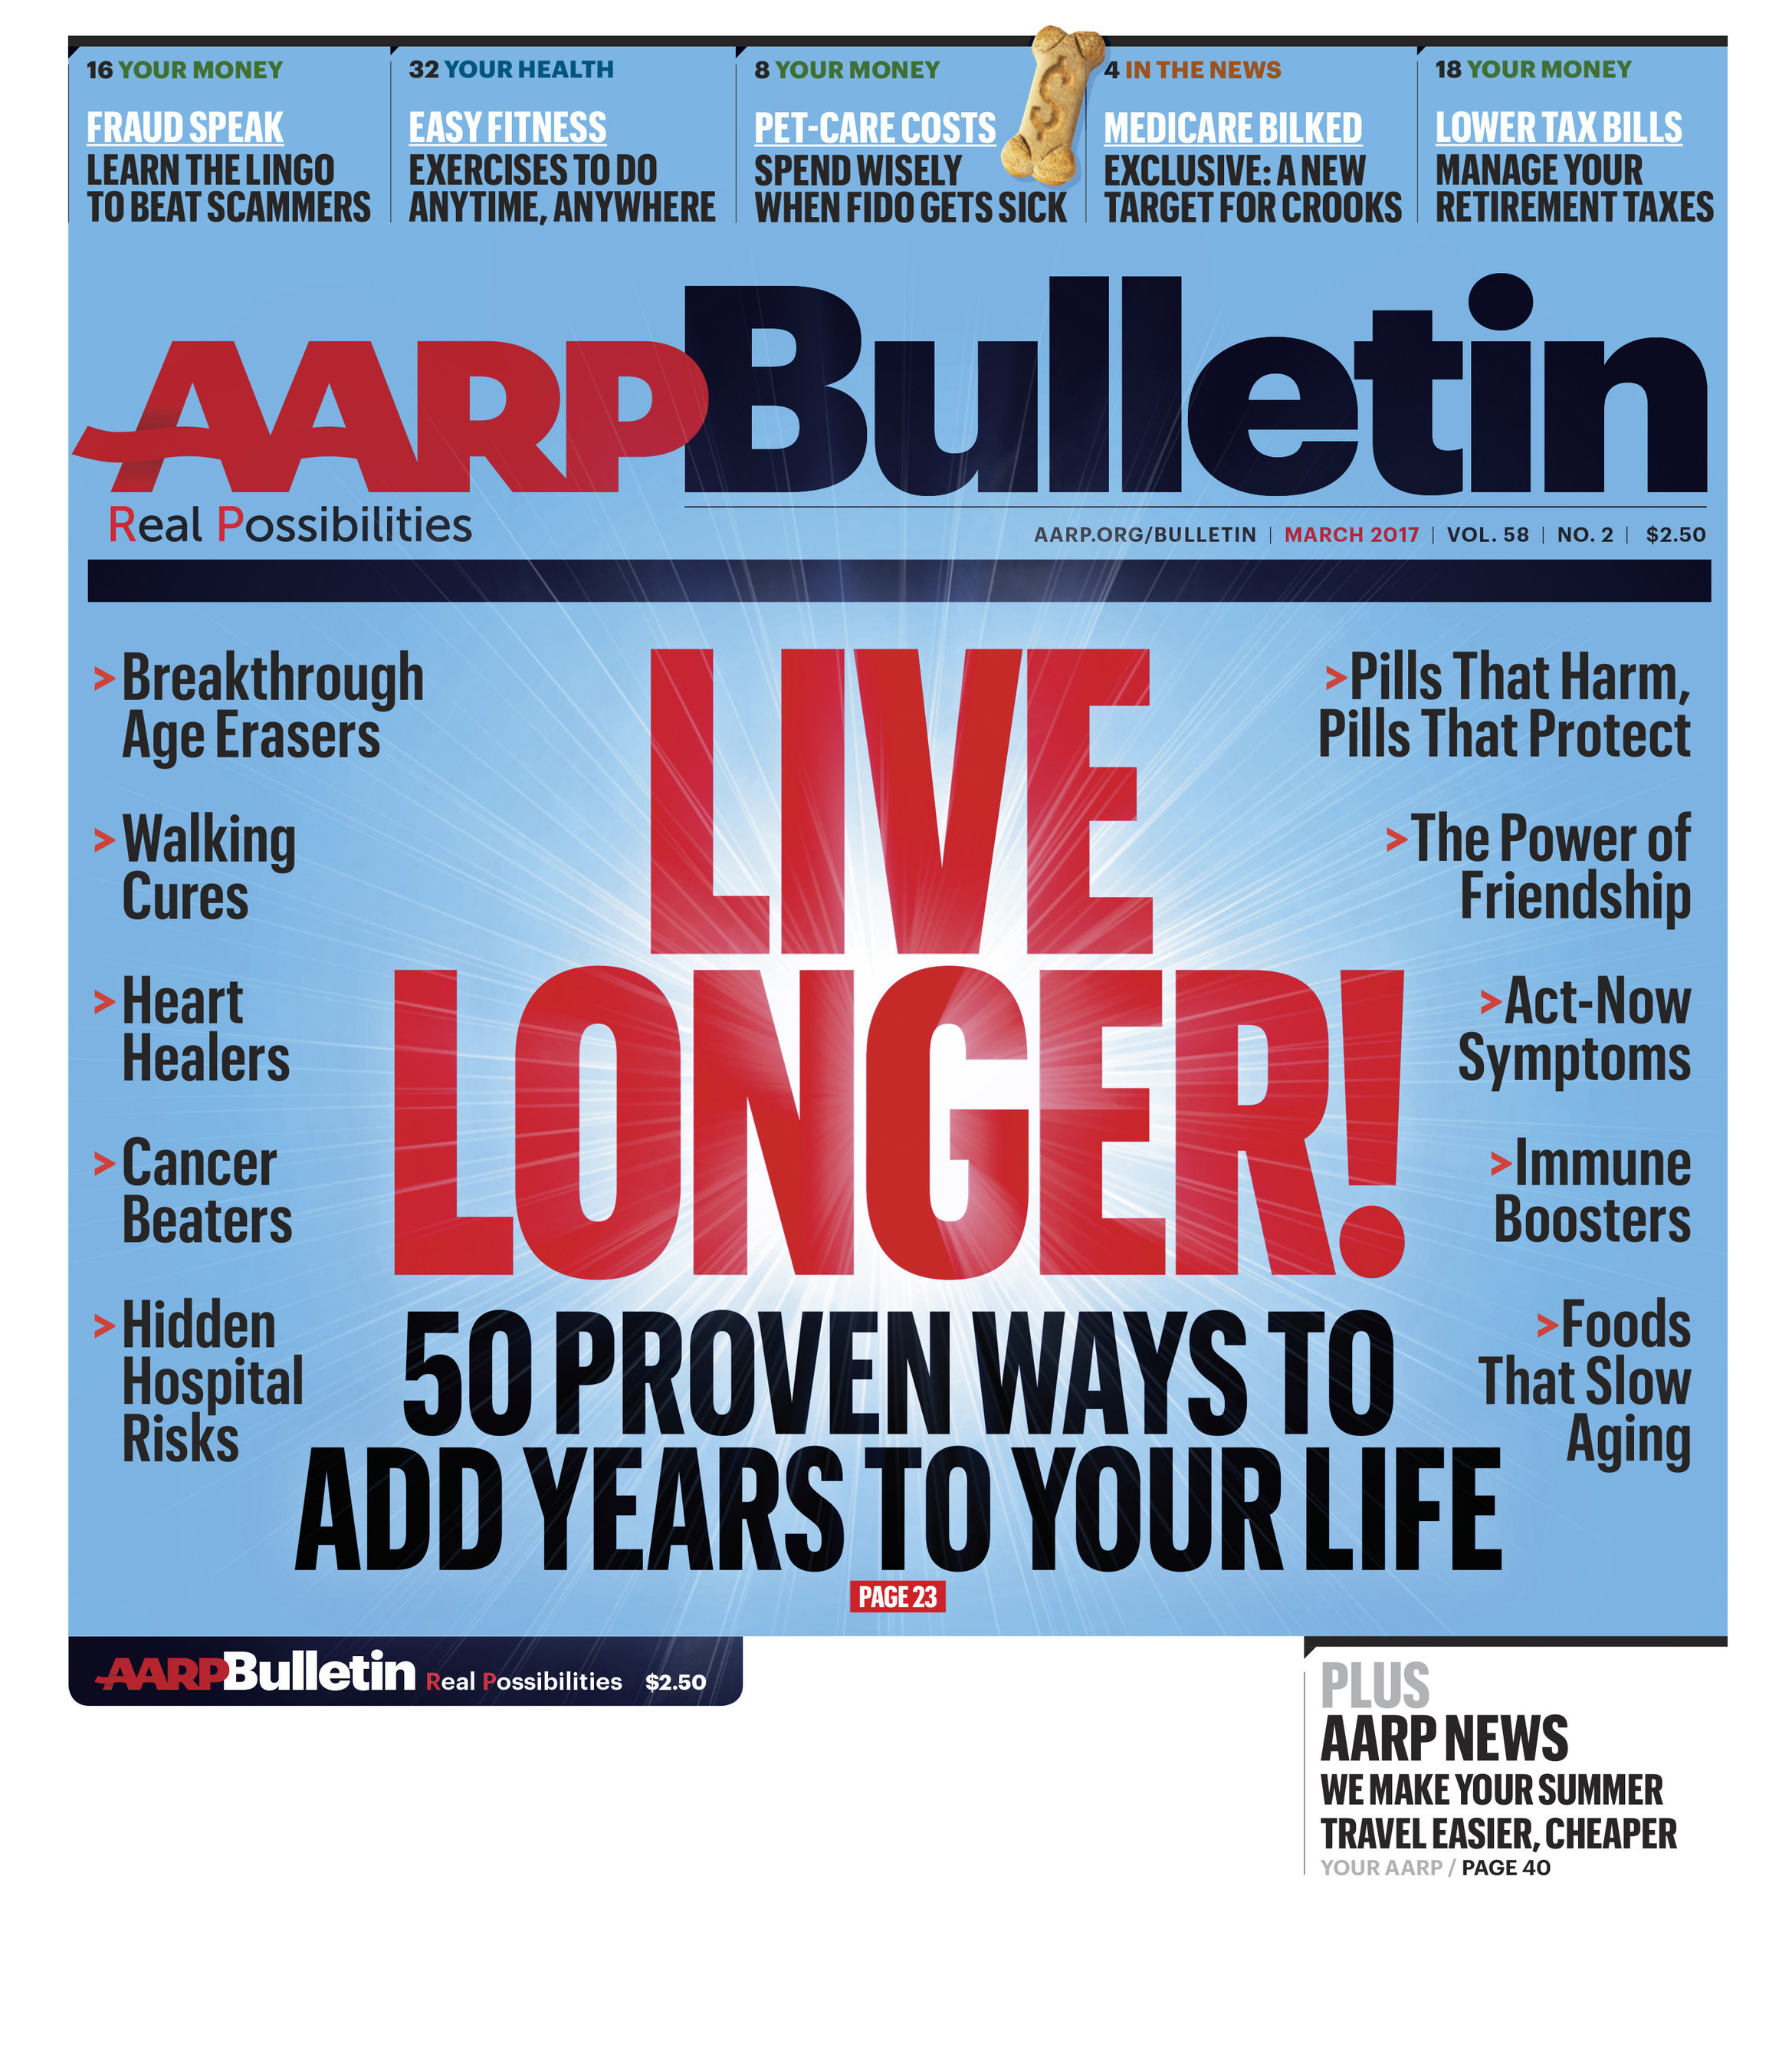 AARP Bulletin's March Issue Features "50 Great Ways to Live Longer" and